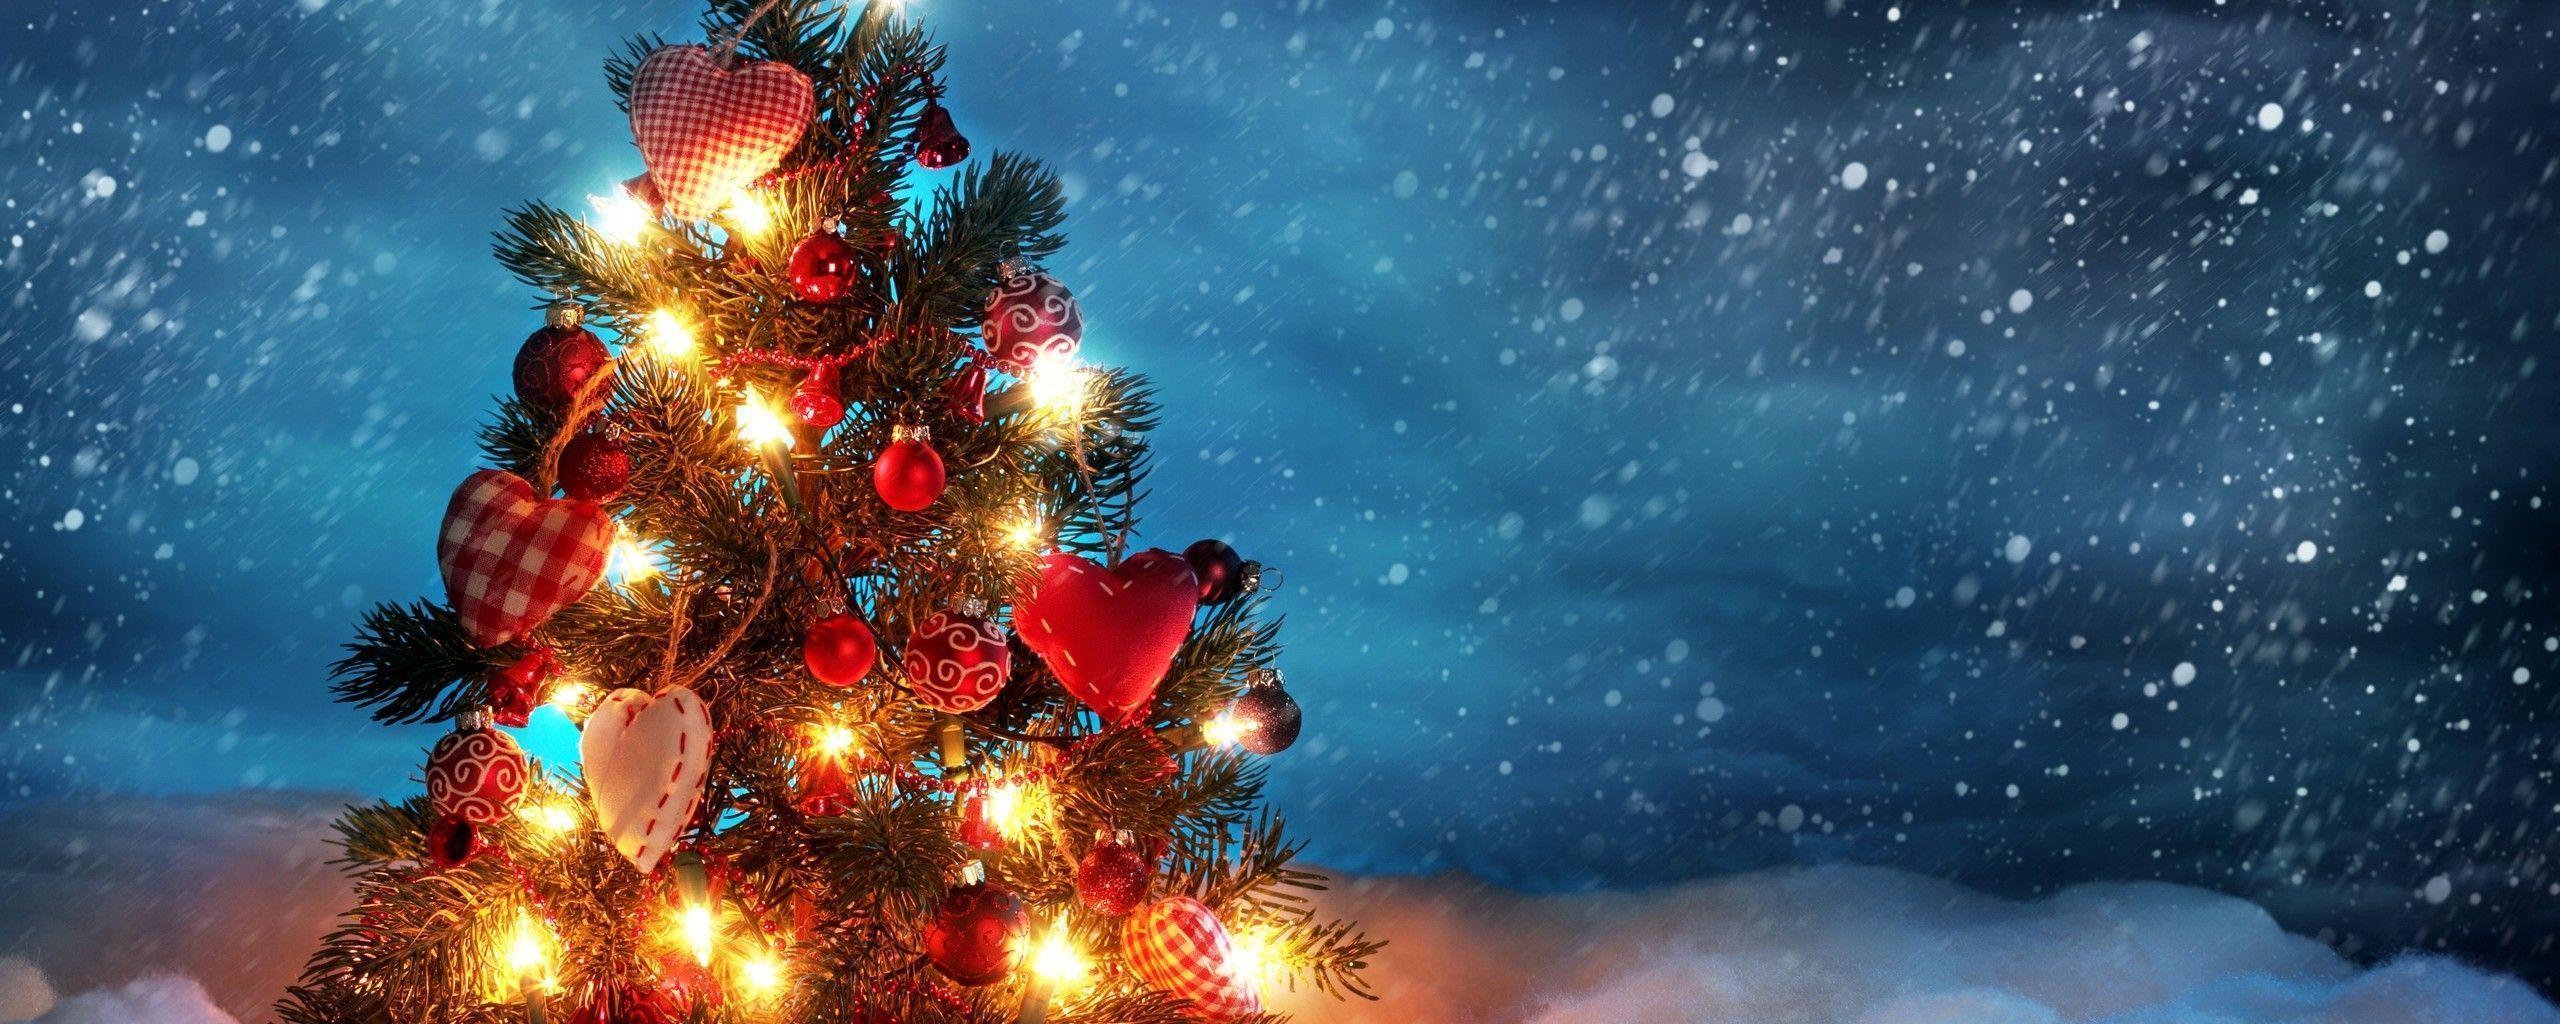 Christmas Screen Backgrounds - Wallpaper Cave